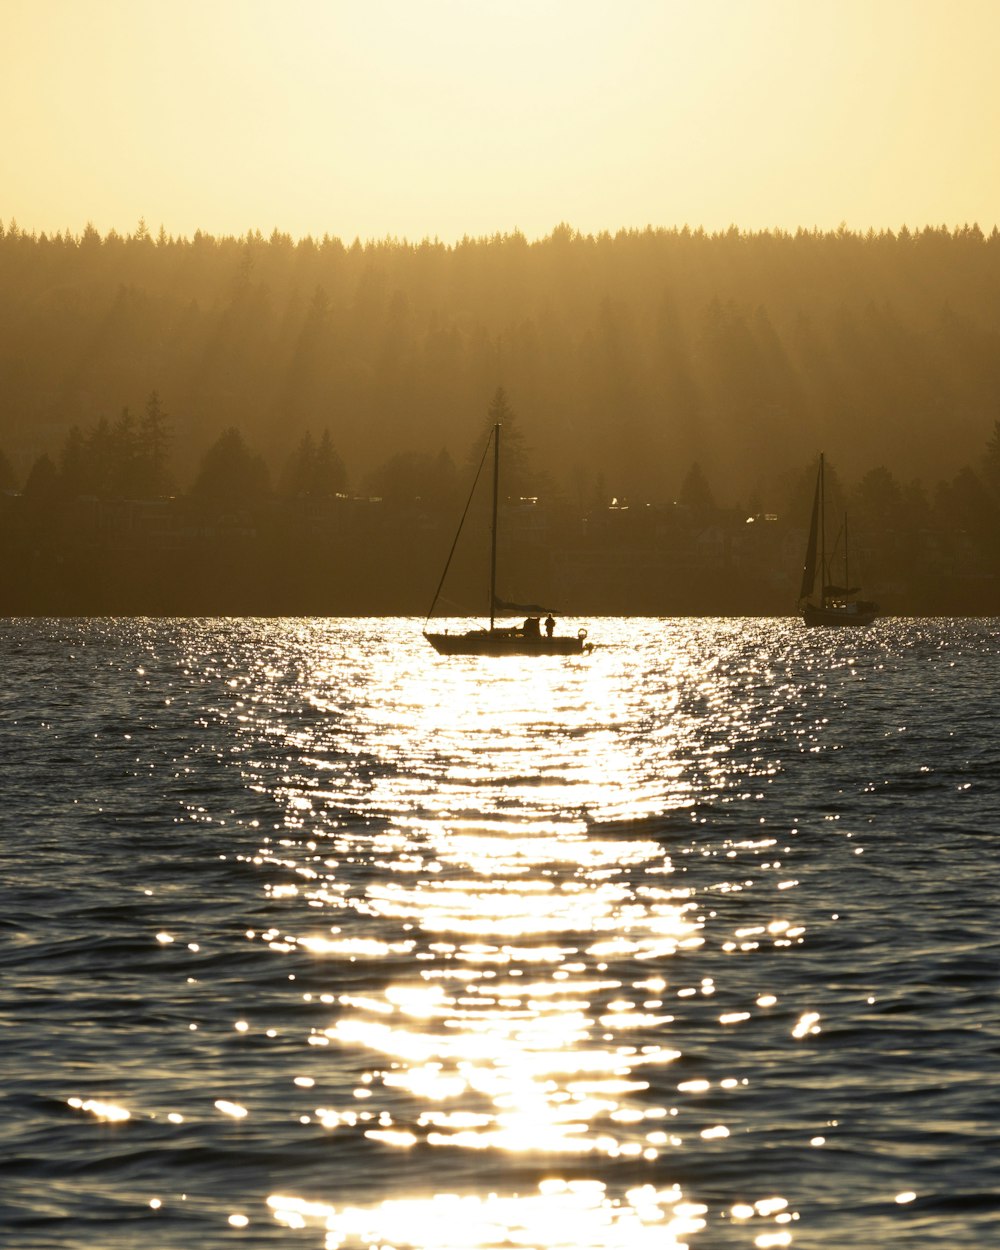 a sailboat in the water with the sun shining through the trees